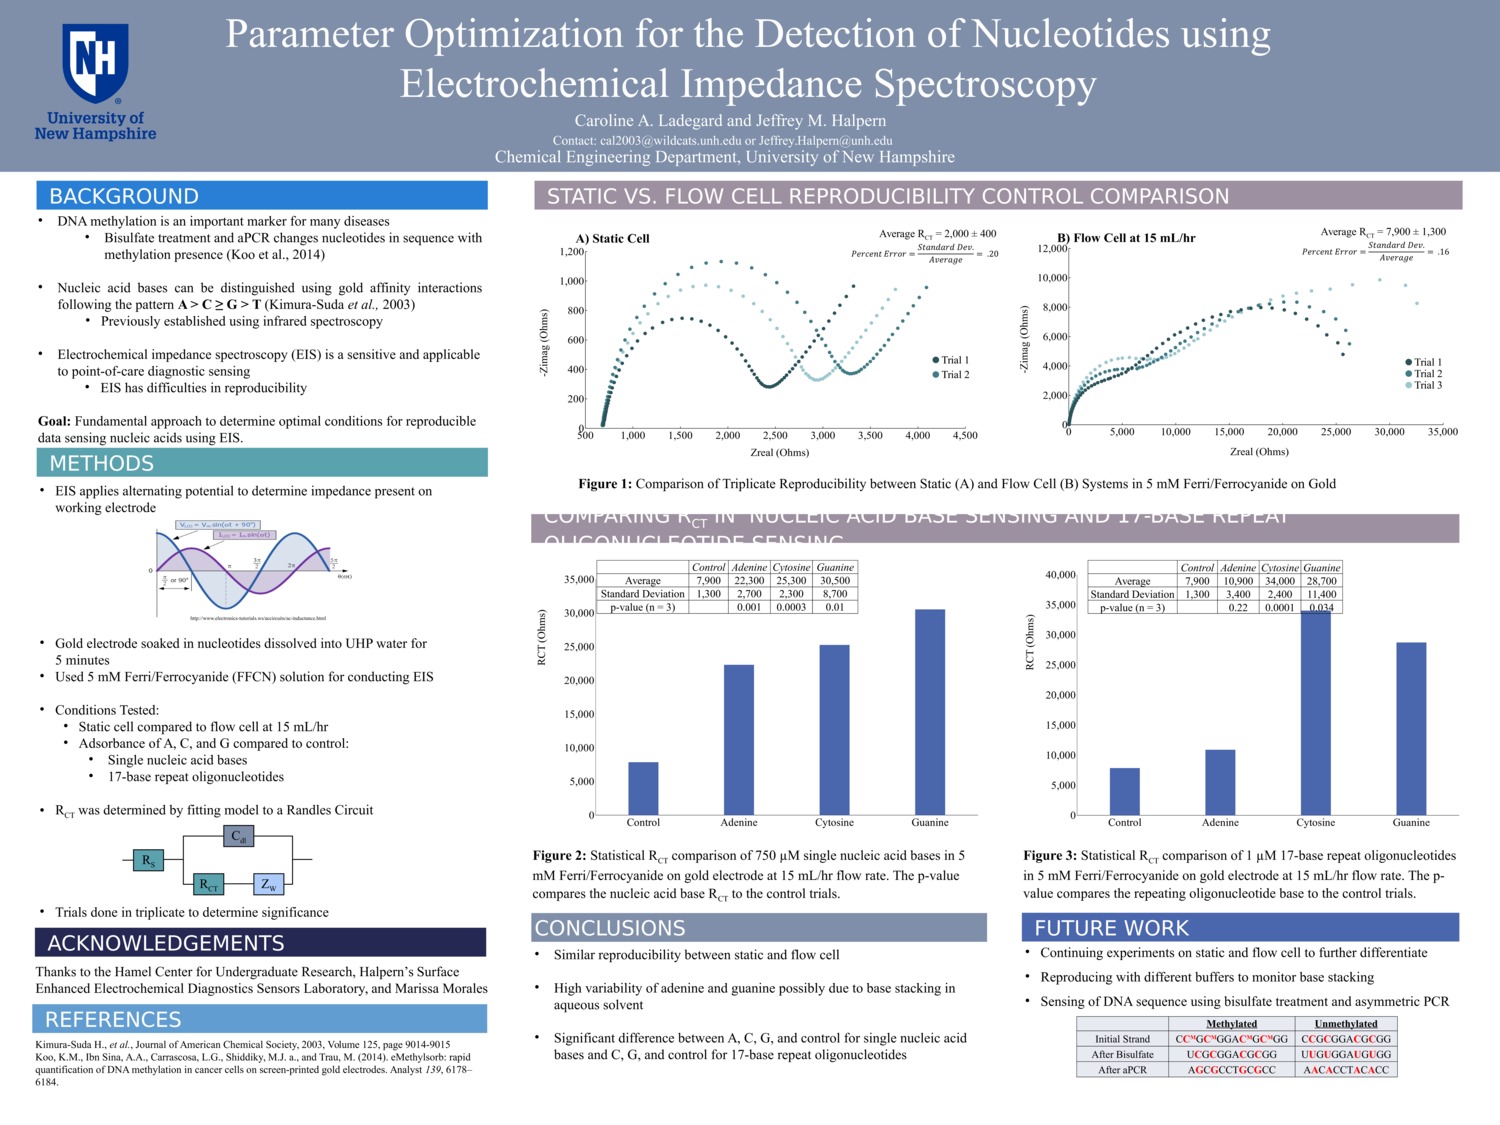 Parameter Optimization Of The Detection Of Nucleotides Using Electrochemical Impedance Spectroscopy by mm1452